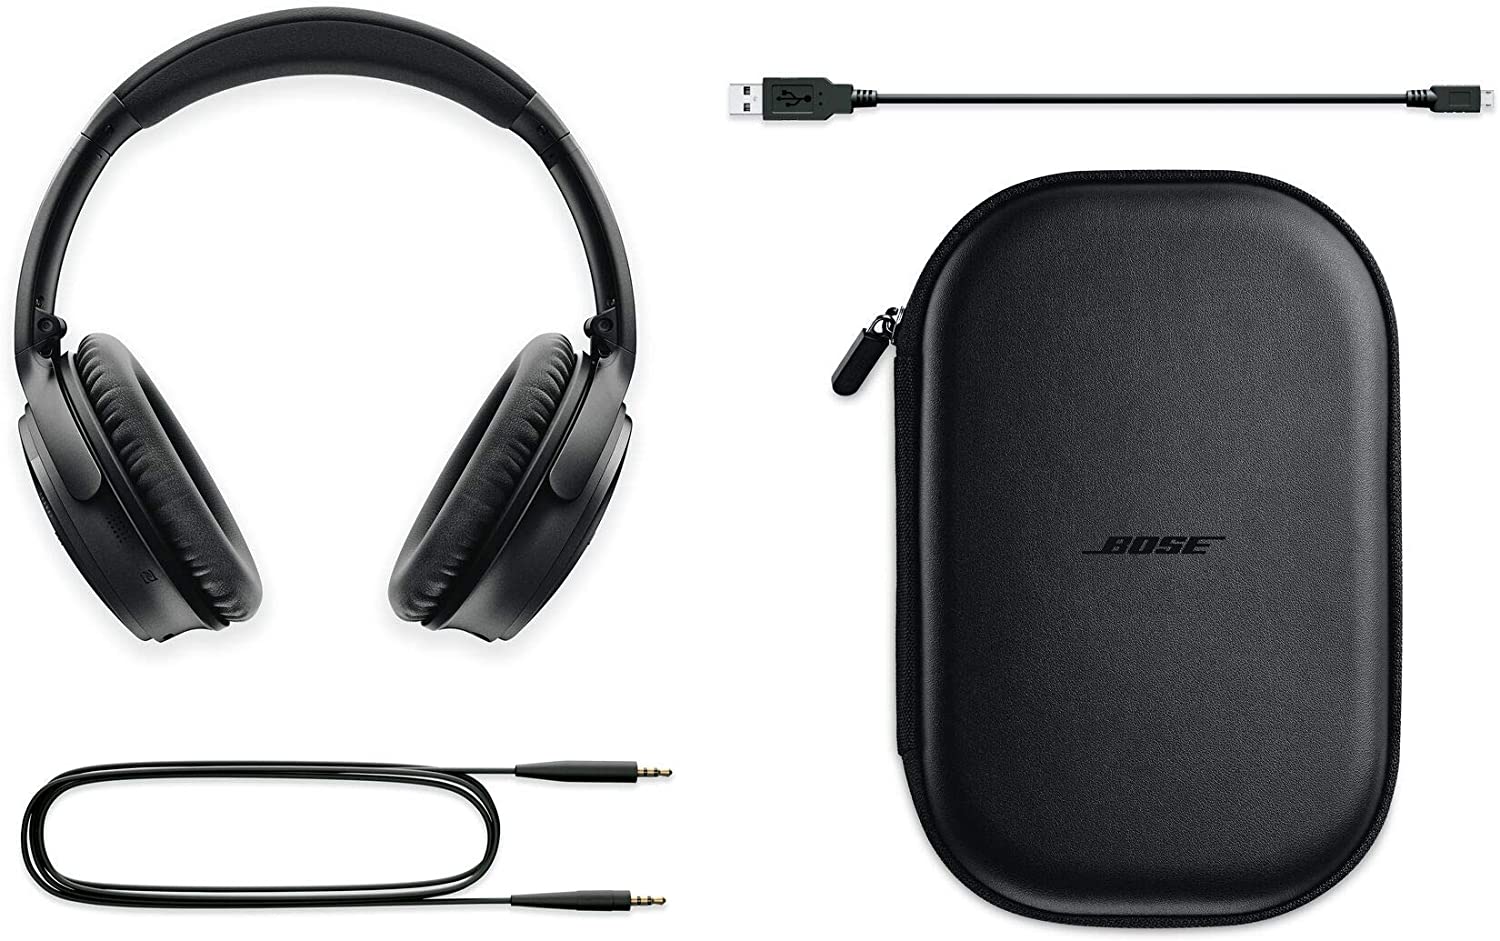 Cruise gear for Prime Day - Bose headphones with case and cords